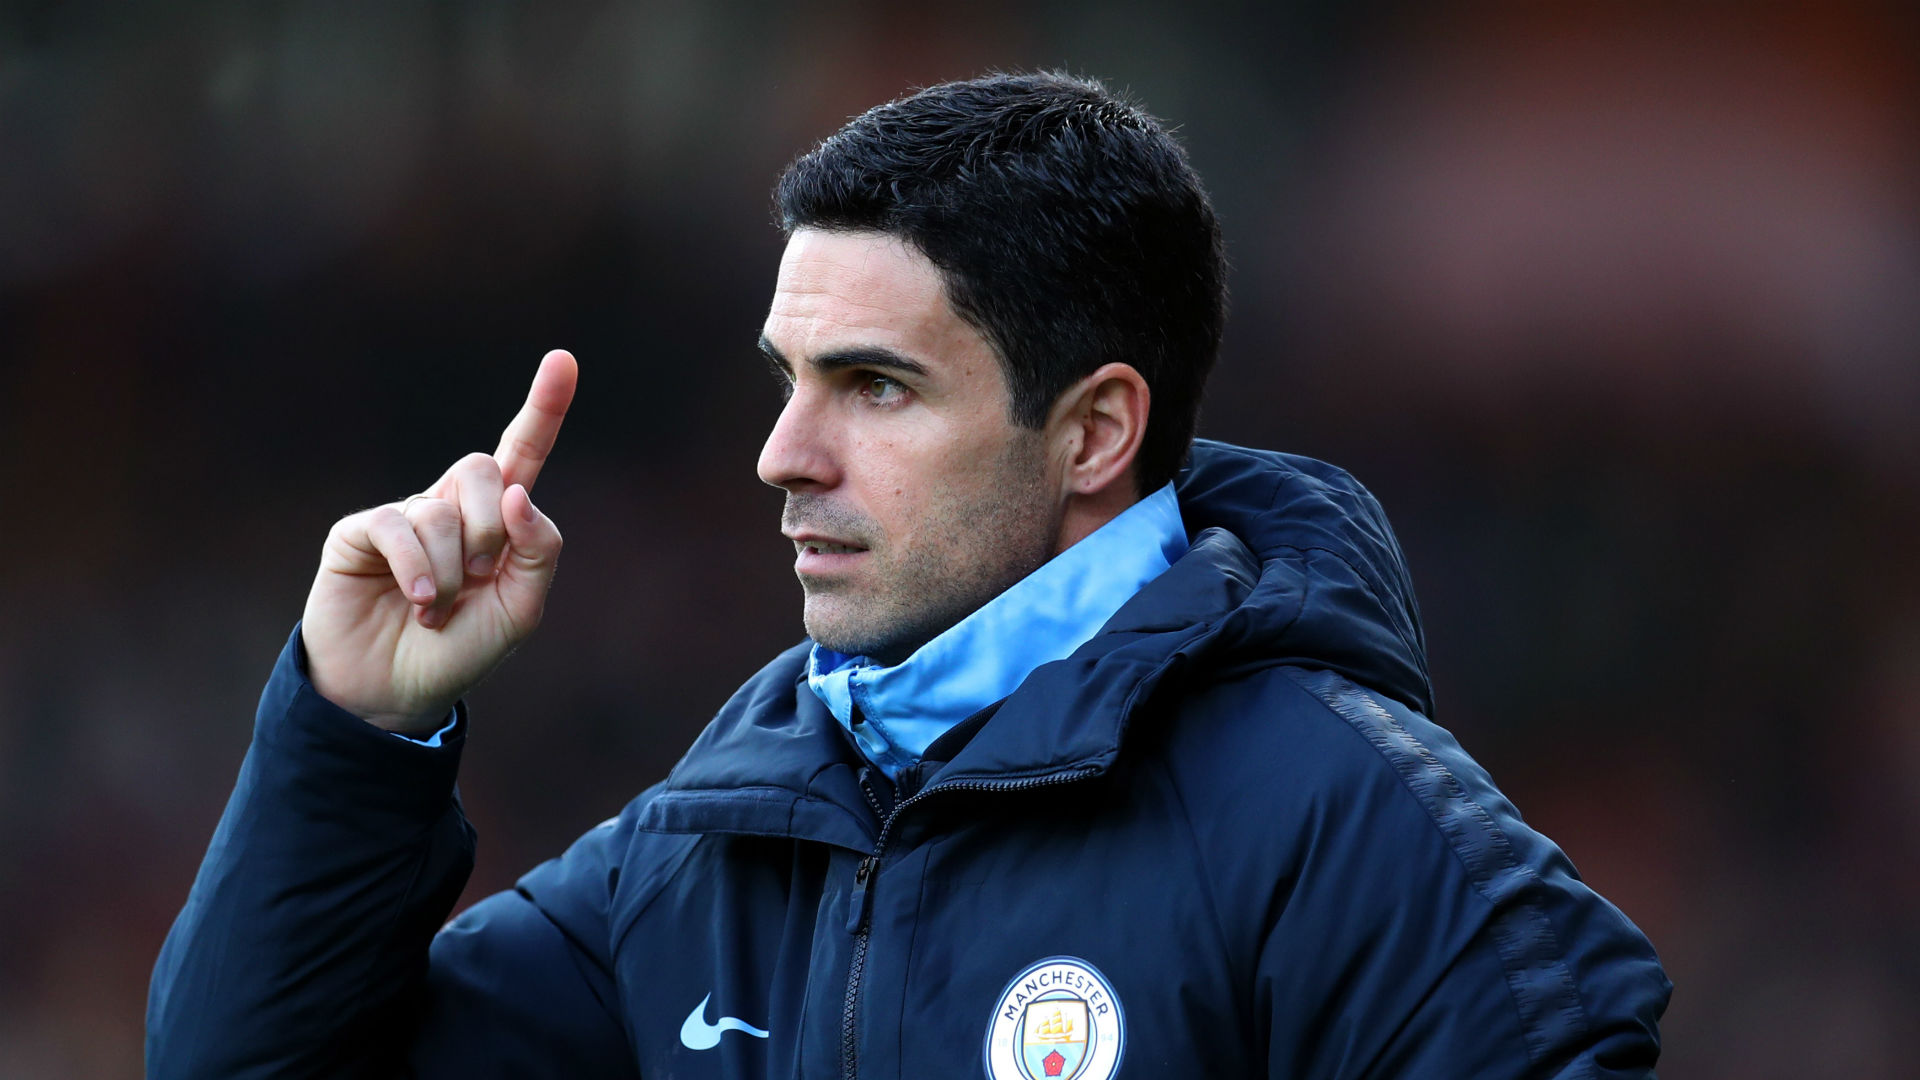 Arsenal head coach Mikel Arteta was pleased to see old employers Manchester City cleared to compete in next season's Champions League.